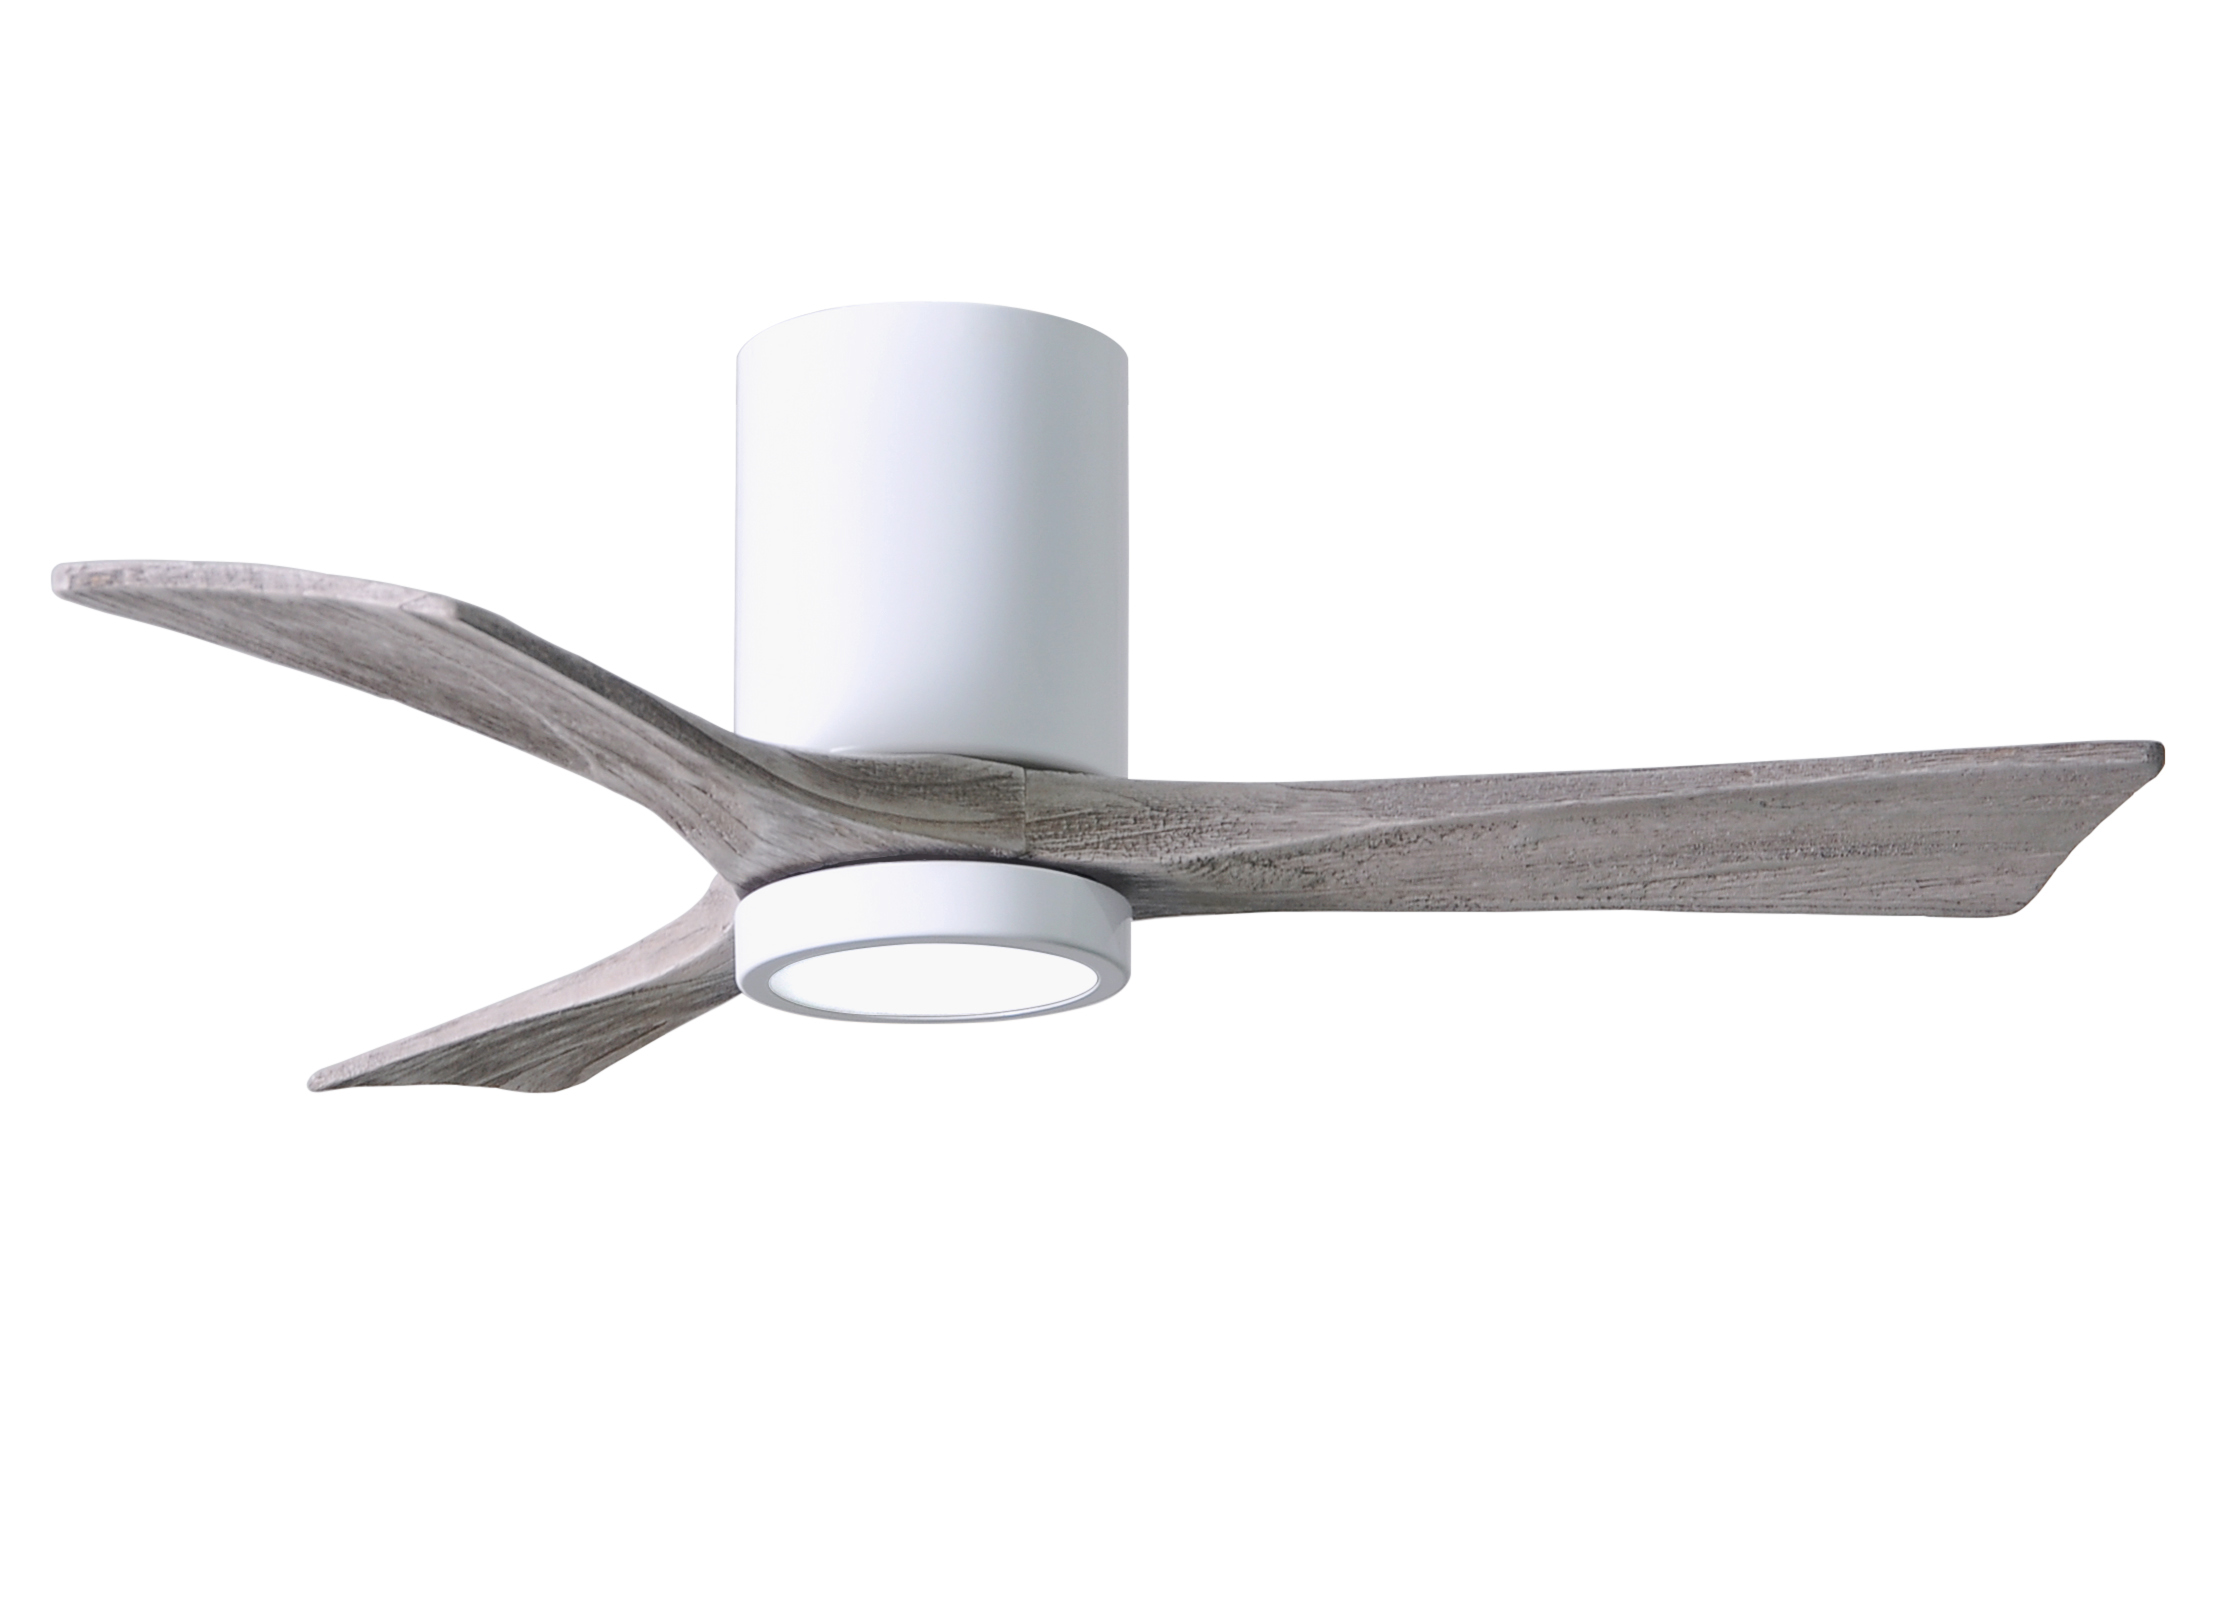 Irene-3HLK Ceiling Fan in Gloss White Finish with 42